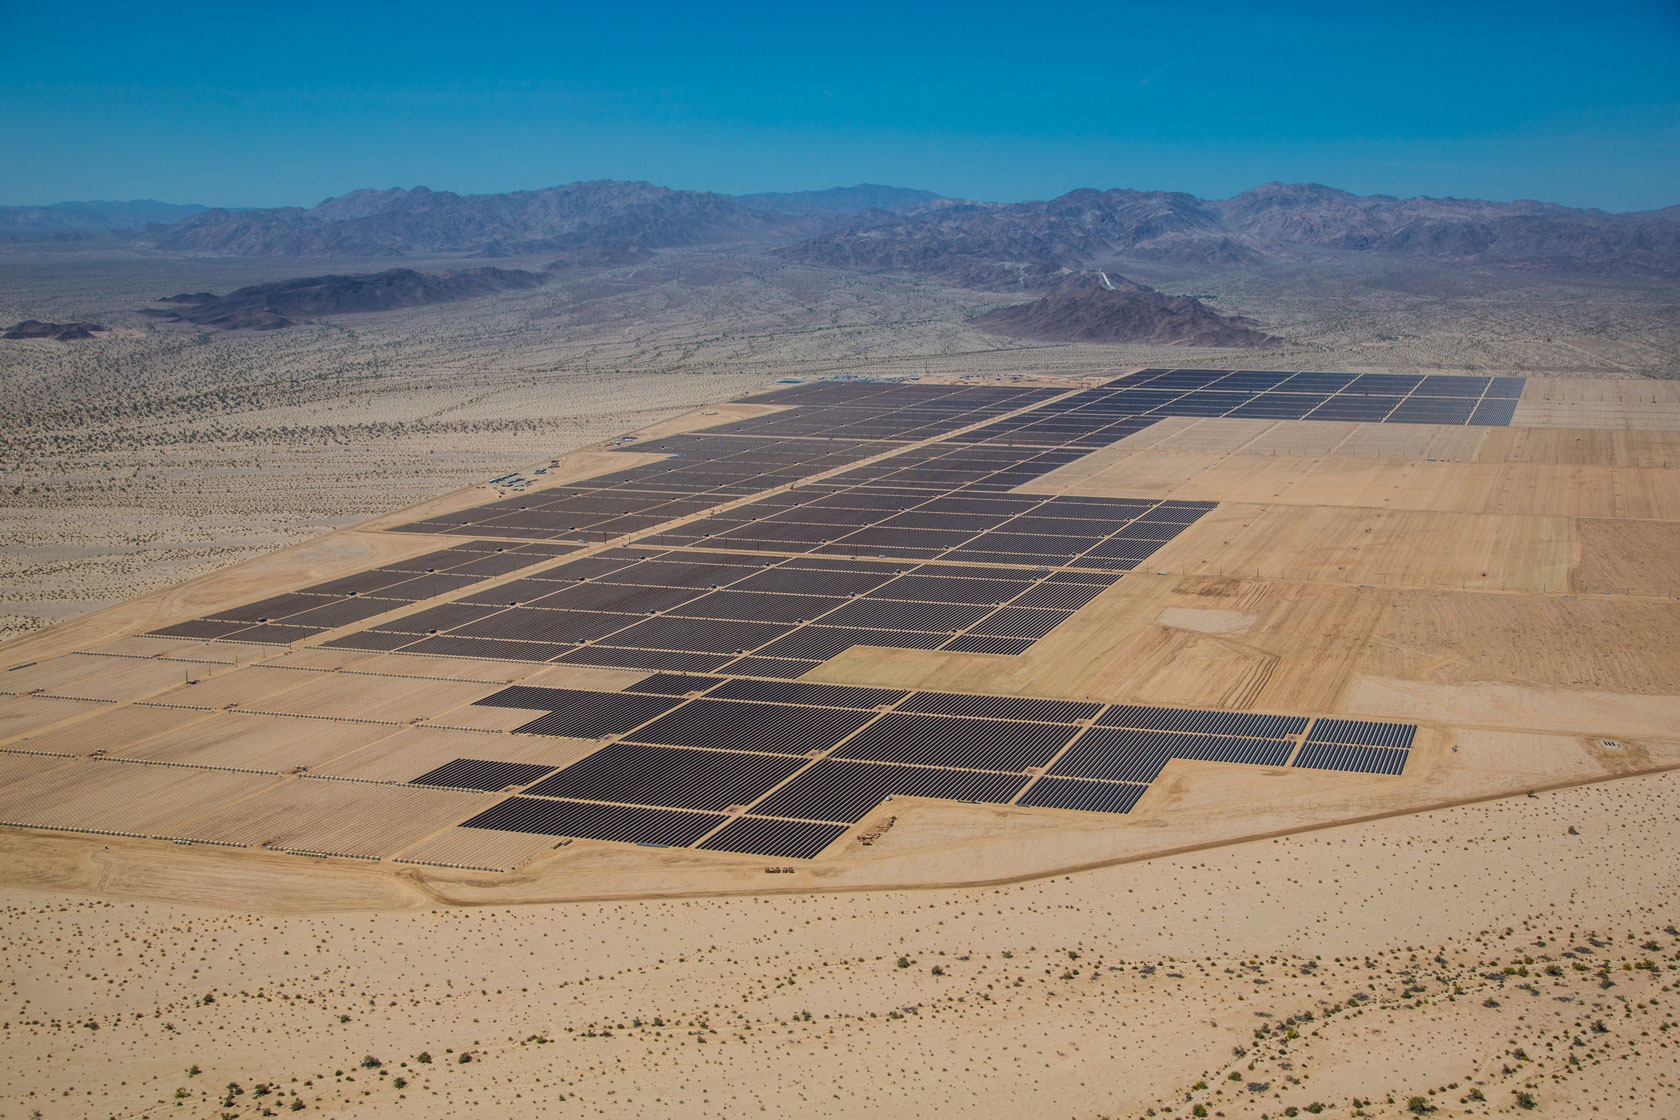 A field of solar panels is seen in the middle of the desert.